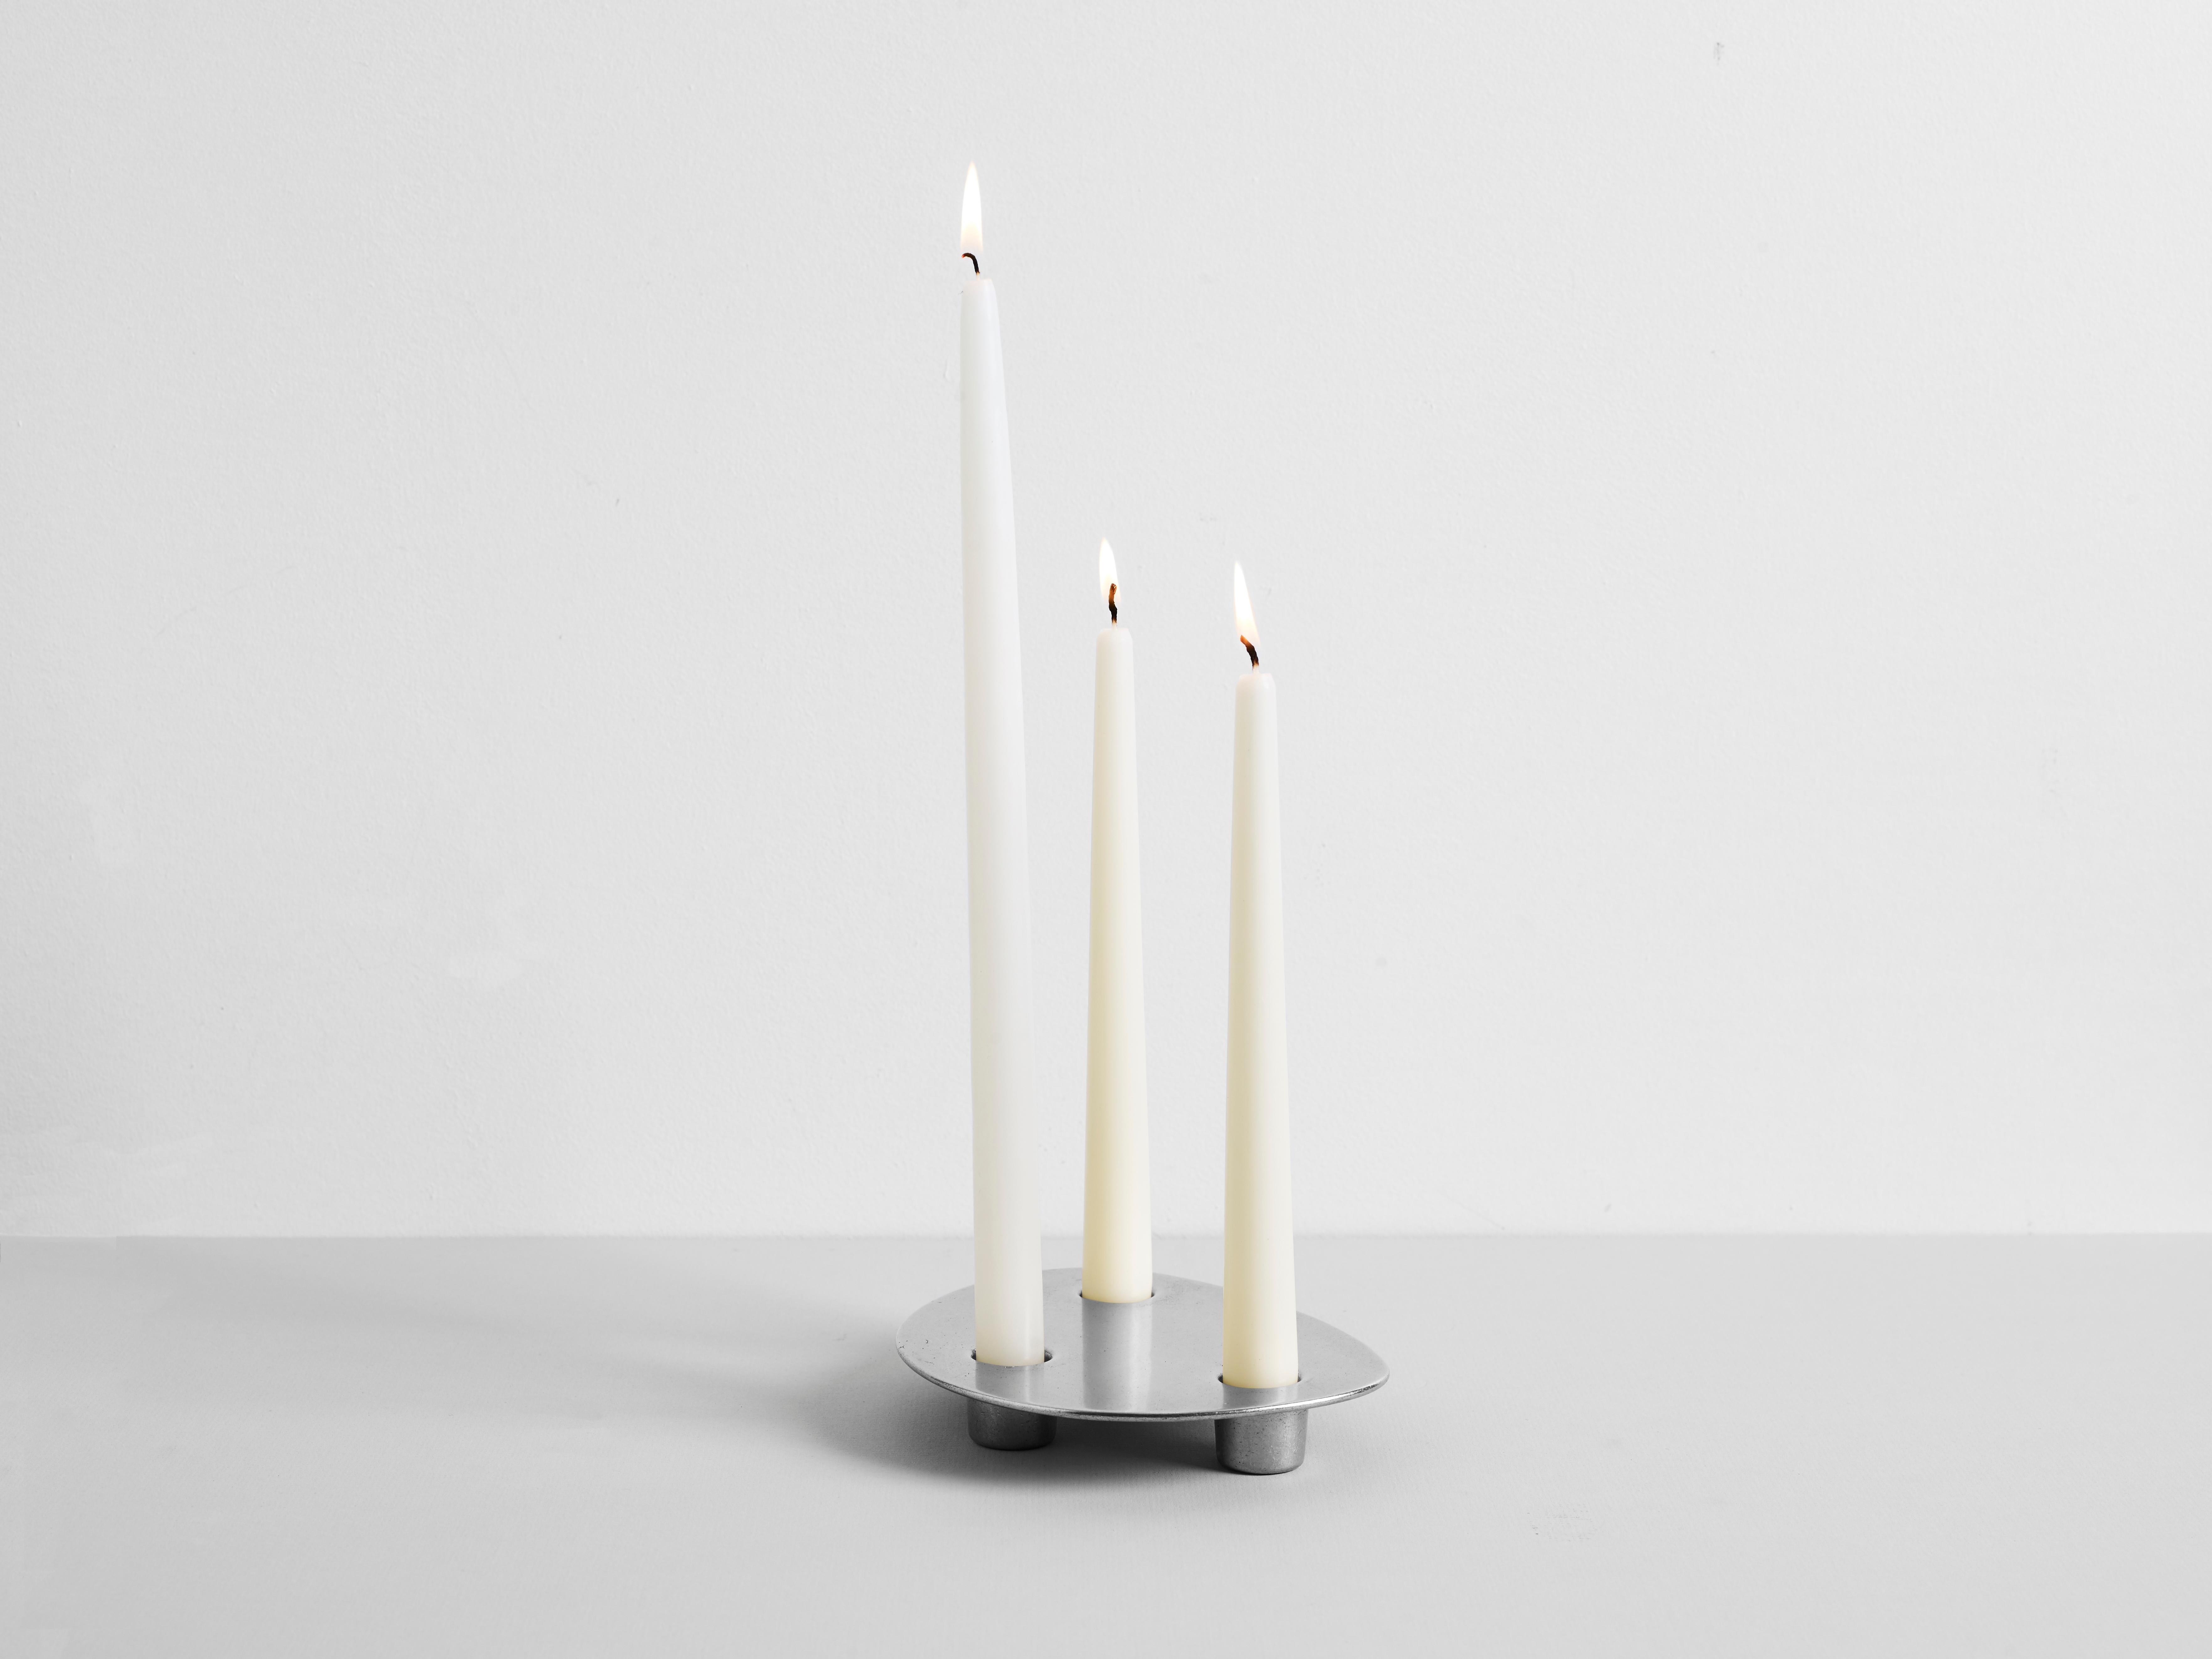 Contemporary aluminium trio candleholder Henry Wilson

Trio holds three candles in a solid, hand poured, brass form. 

Trio candleholder is manufactured in small batches, slight variations will occur from piece to piece. Production marks may